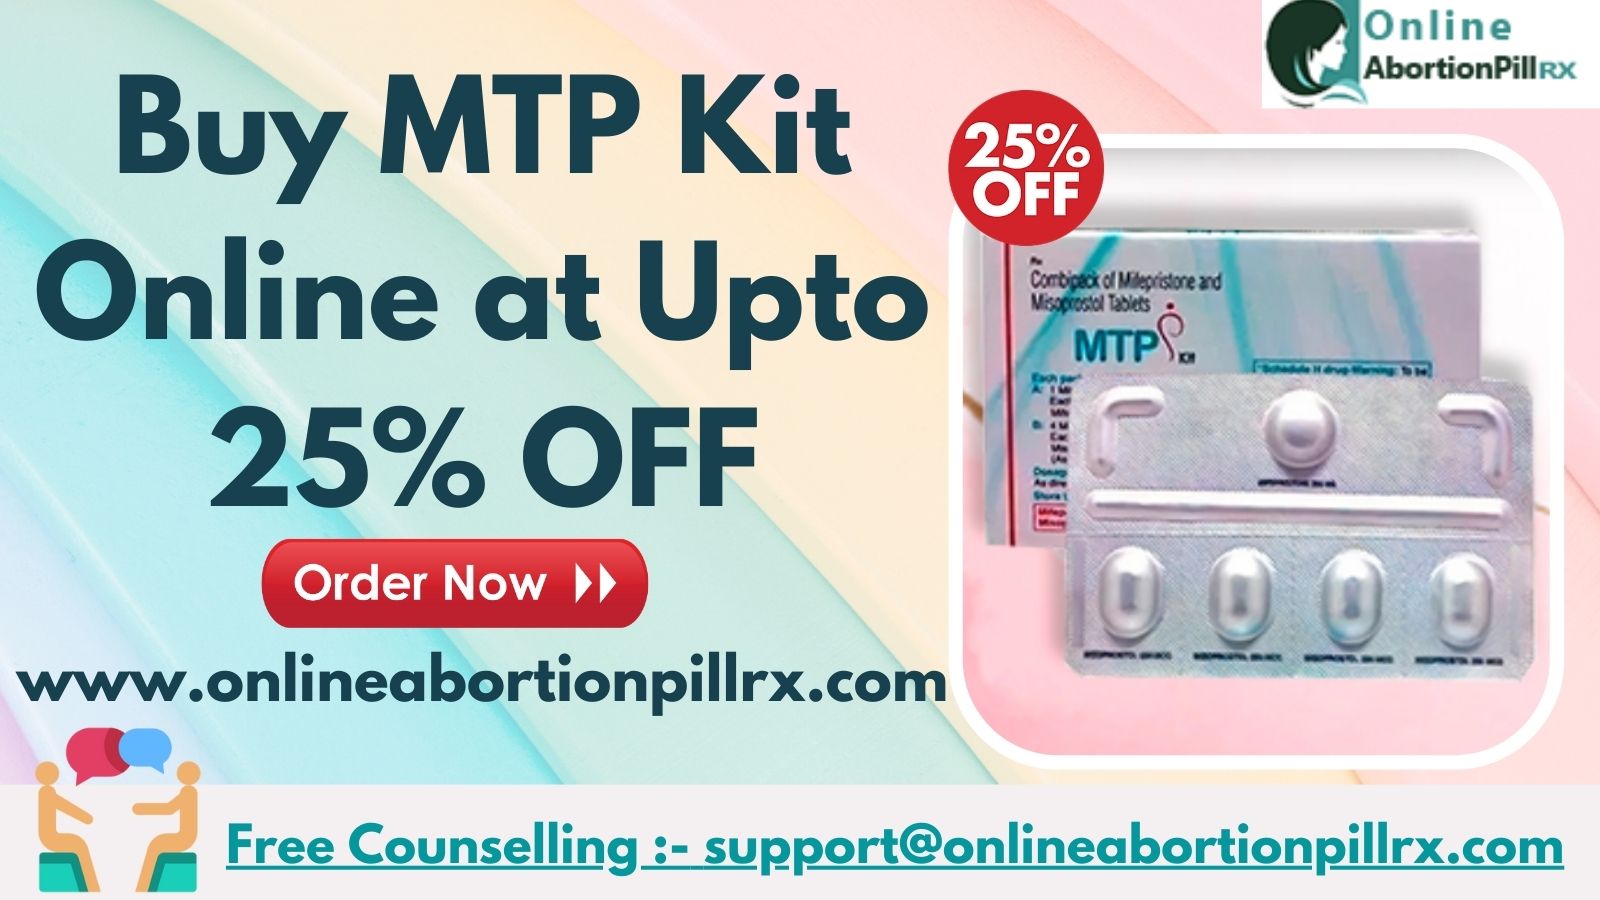 Buy MTP Kit Online at Up to 25 OFF  - Florida - Naples ID1539800